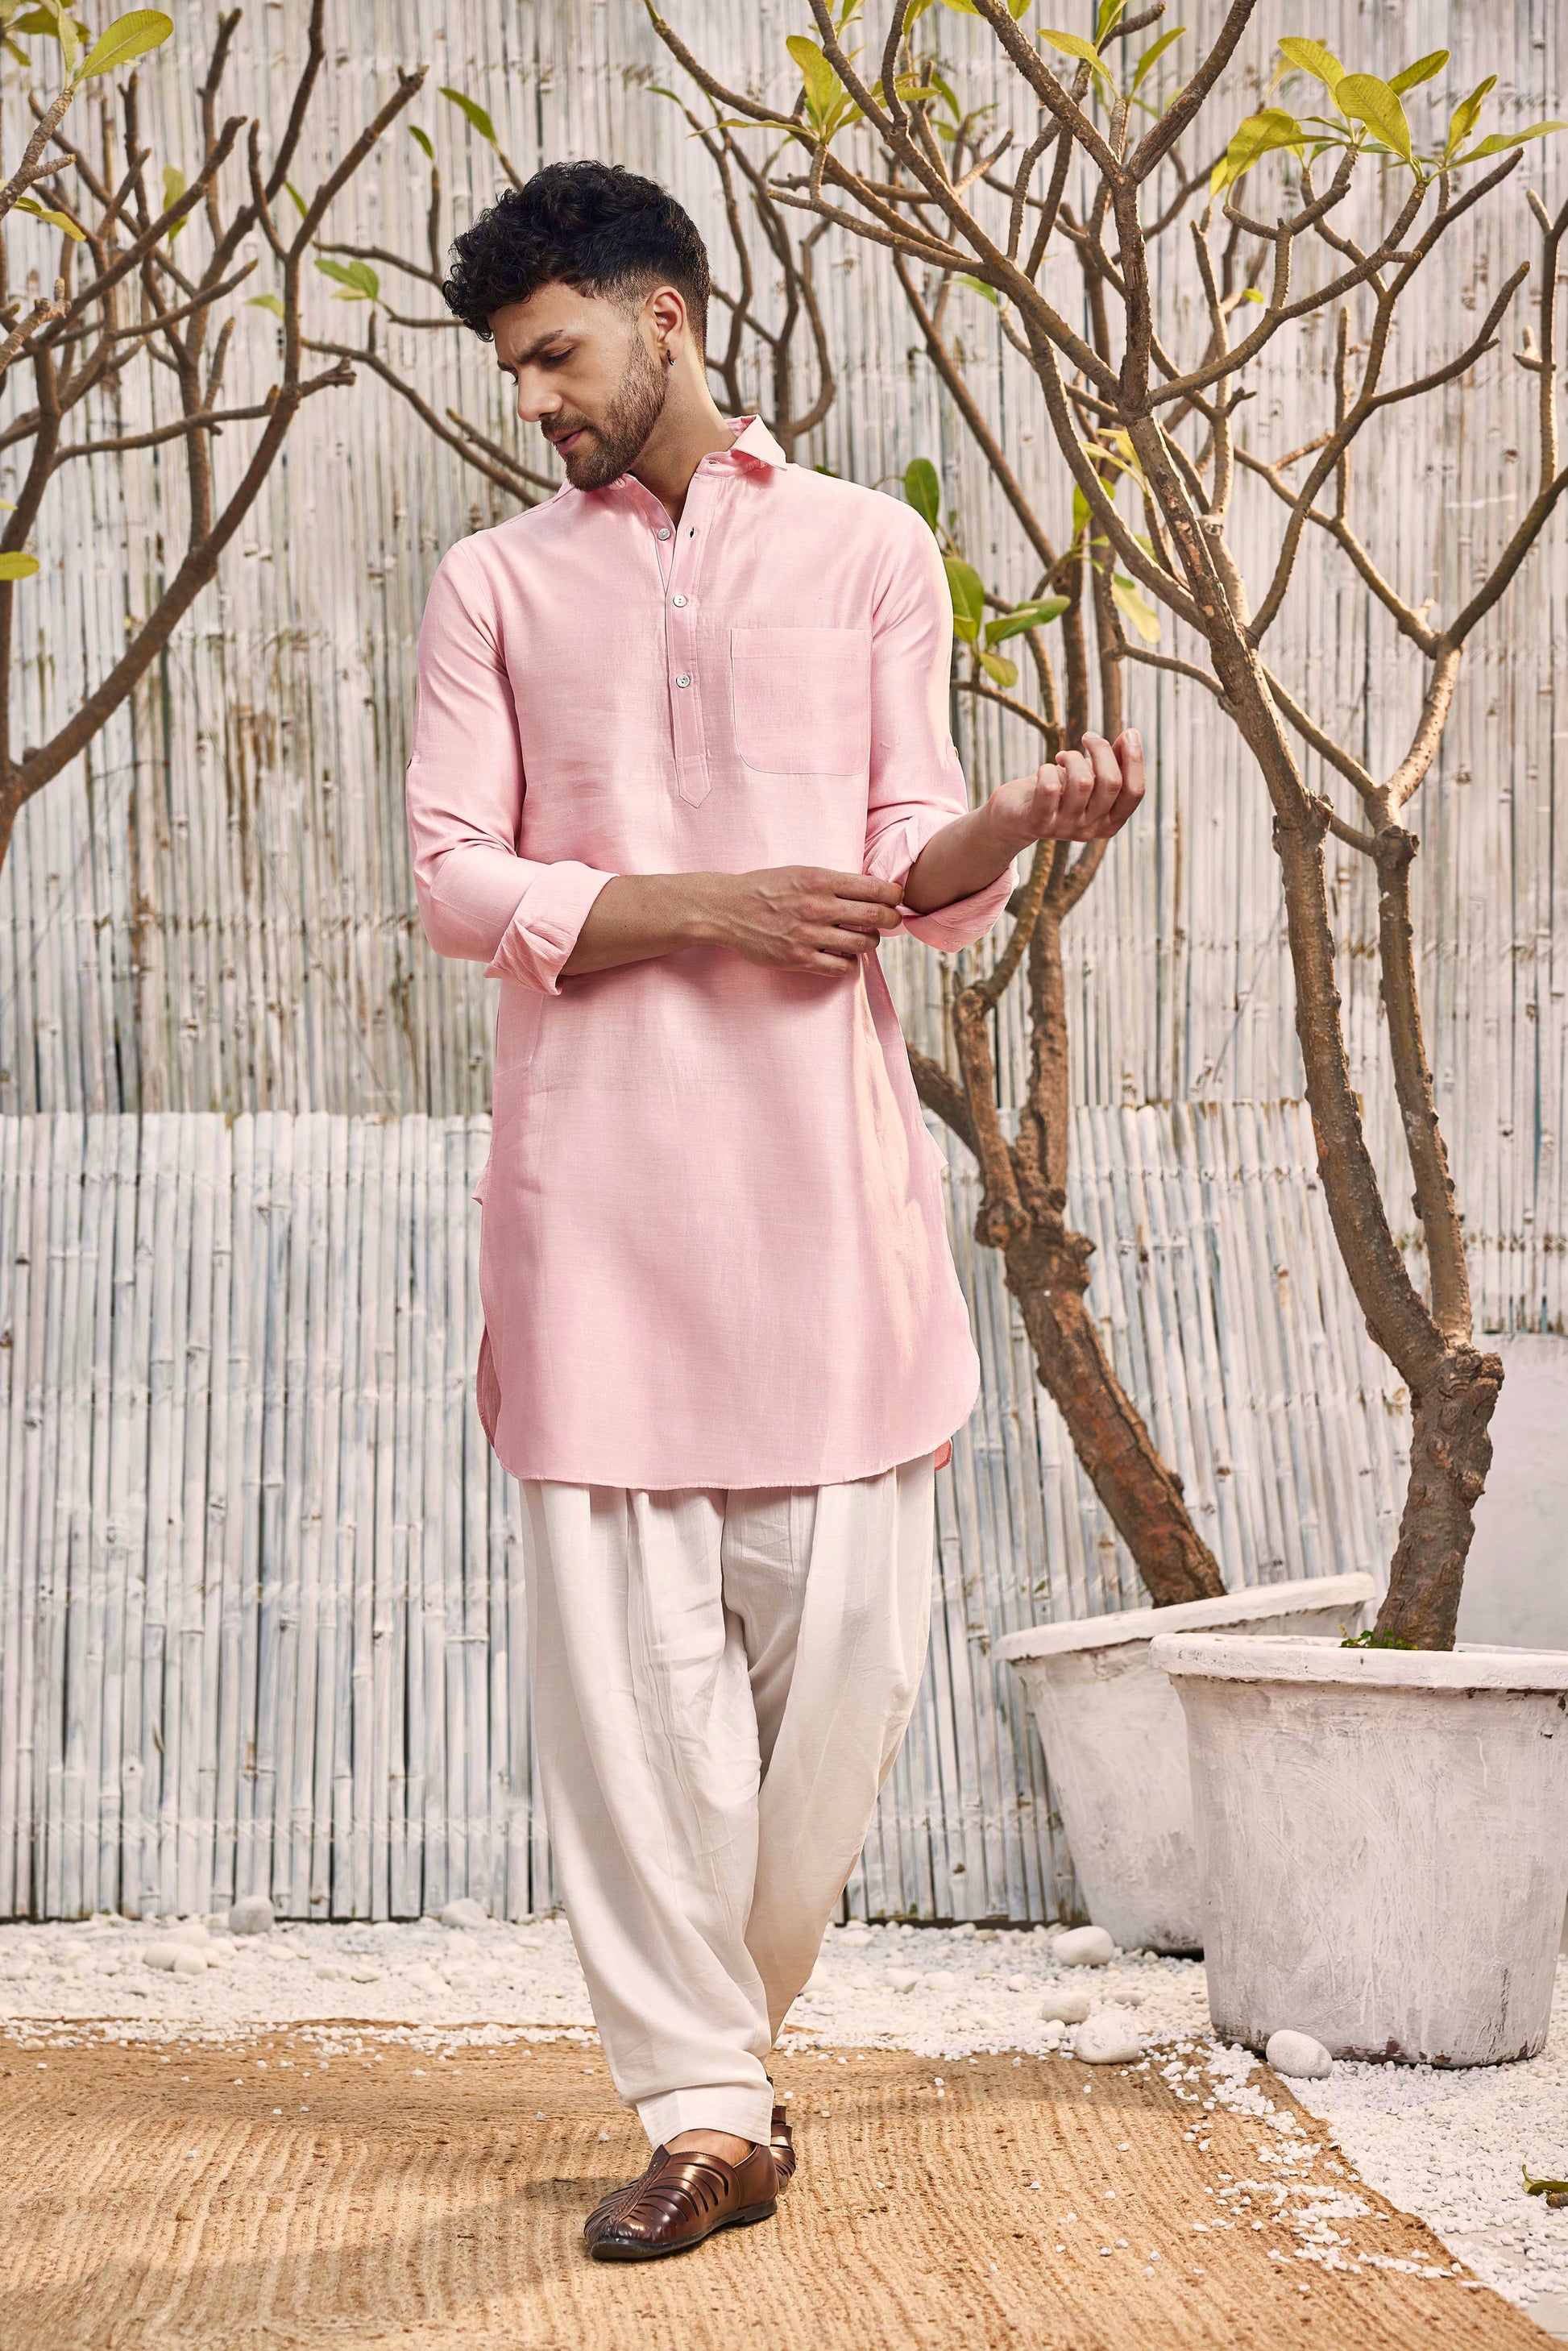 Cotton Bundi Jacket - Pink at Kamakhyaa by Charkhee. This item is Best Selling, Cotton, Dobby Cotton, Festive Wear, Indian Wear, Indianwear Jackets, Jackets, Mens Overlay, Menswear, Natural, Pink, Regular Fit, Shores 23, Textured